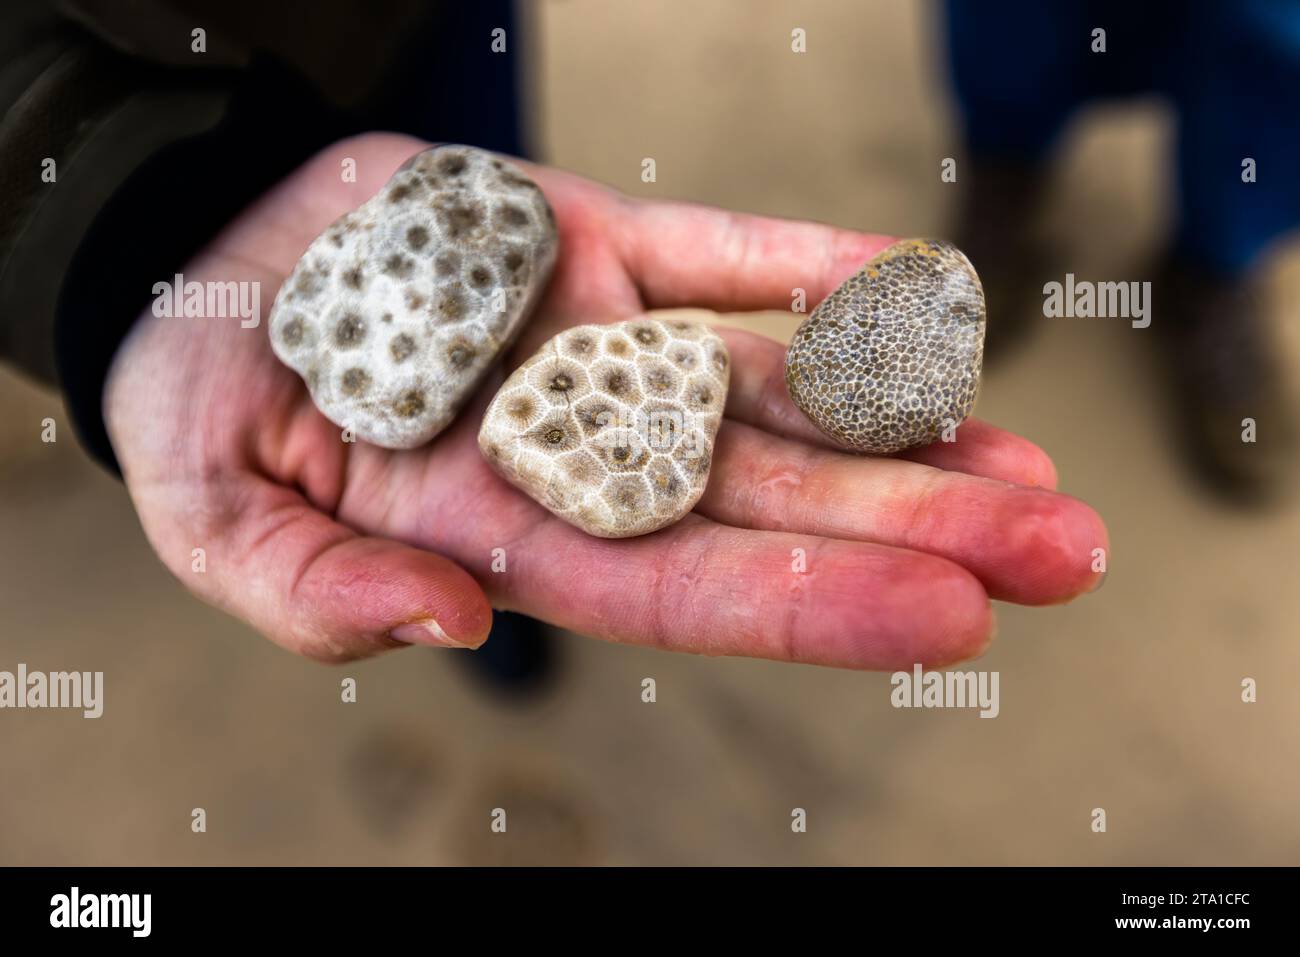 Petoskey stone is a stone that can be polished as a gemstone and consists of fossilized coral skeletons. Charlevoix and Petoskey stones can be found on Charlevoix beach, especially in strong winds and swells. Charlevoix, United States Stock Photo